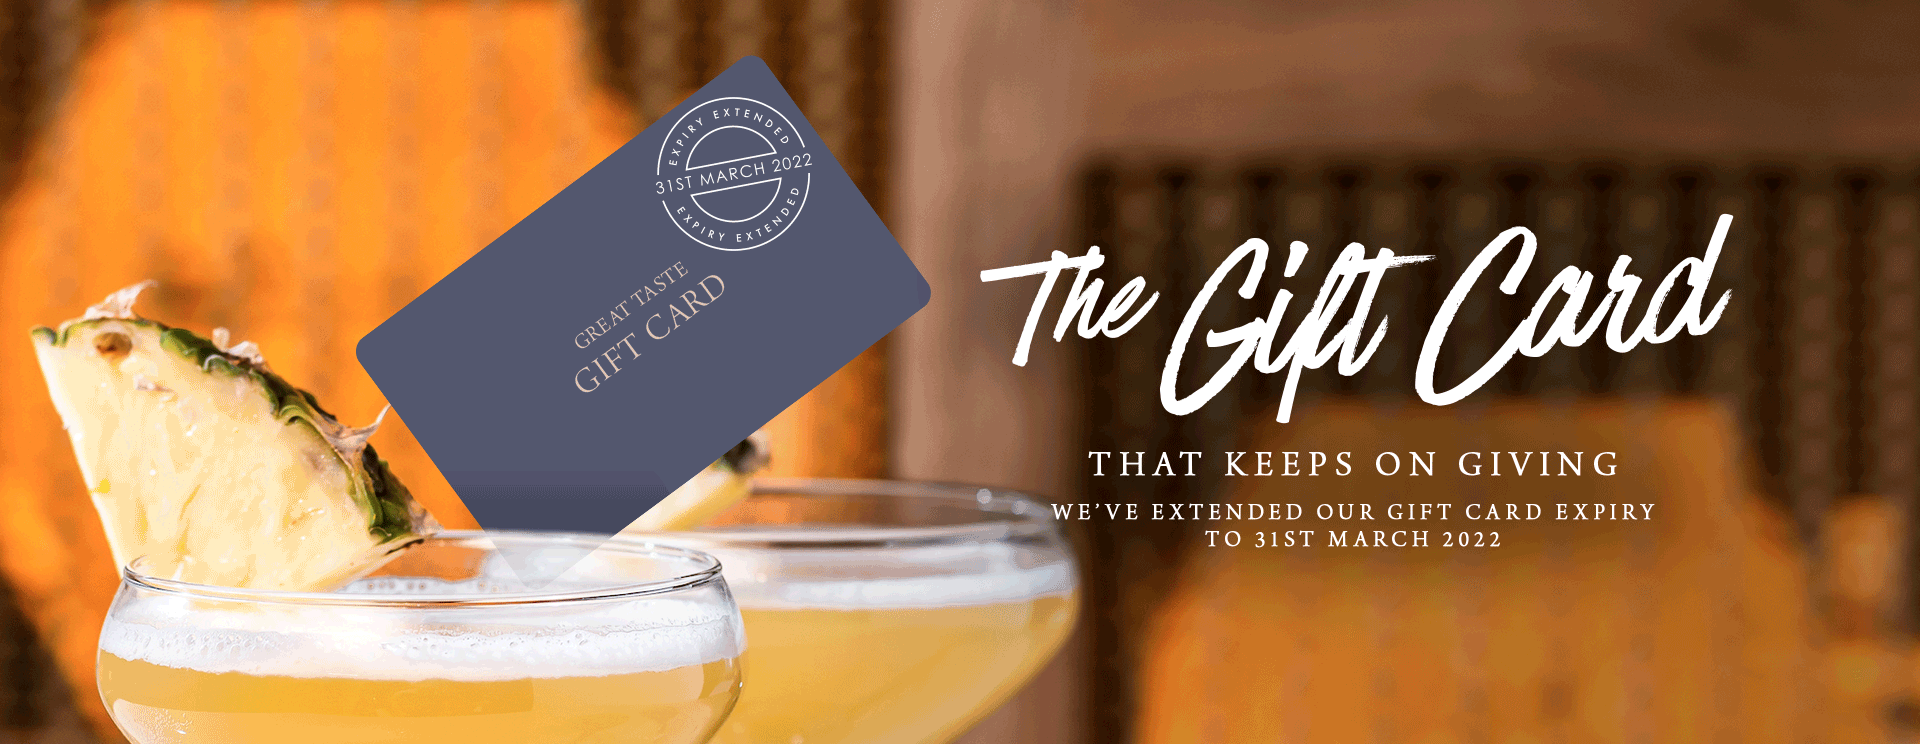 Give the gift of a gift card at The Horse & Groom